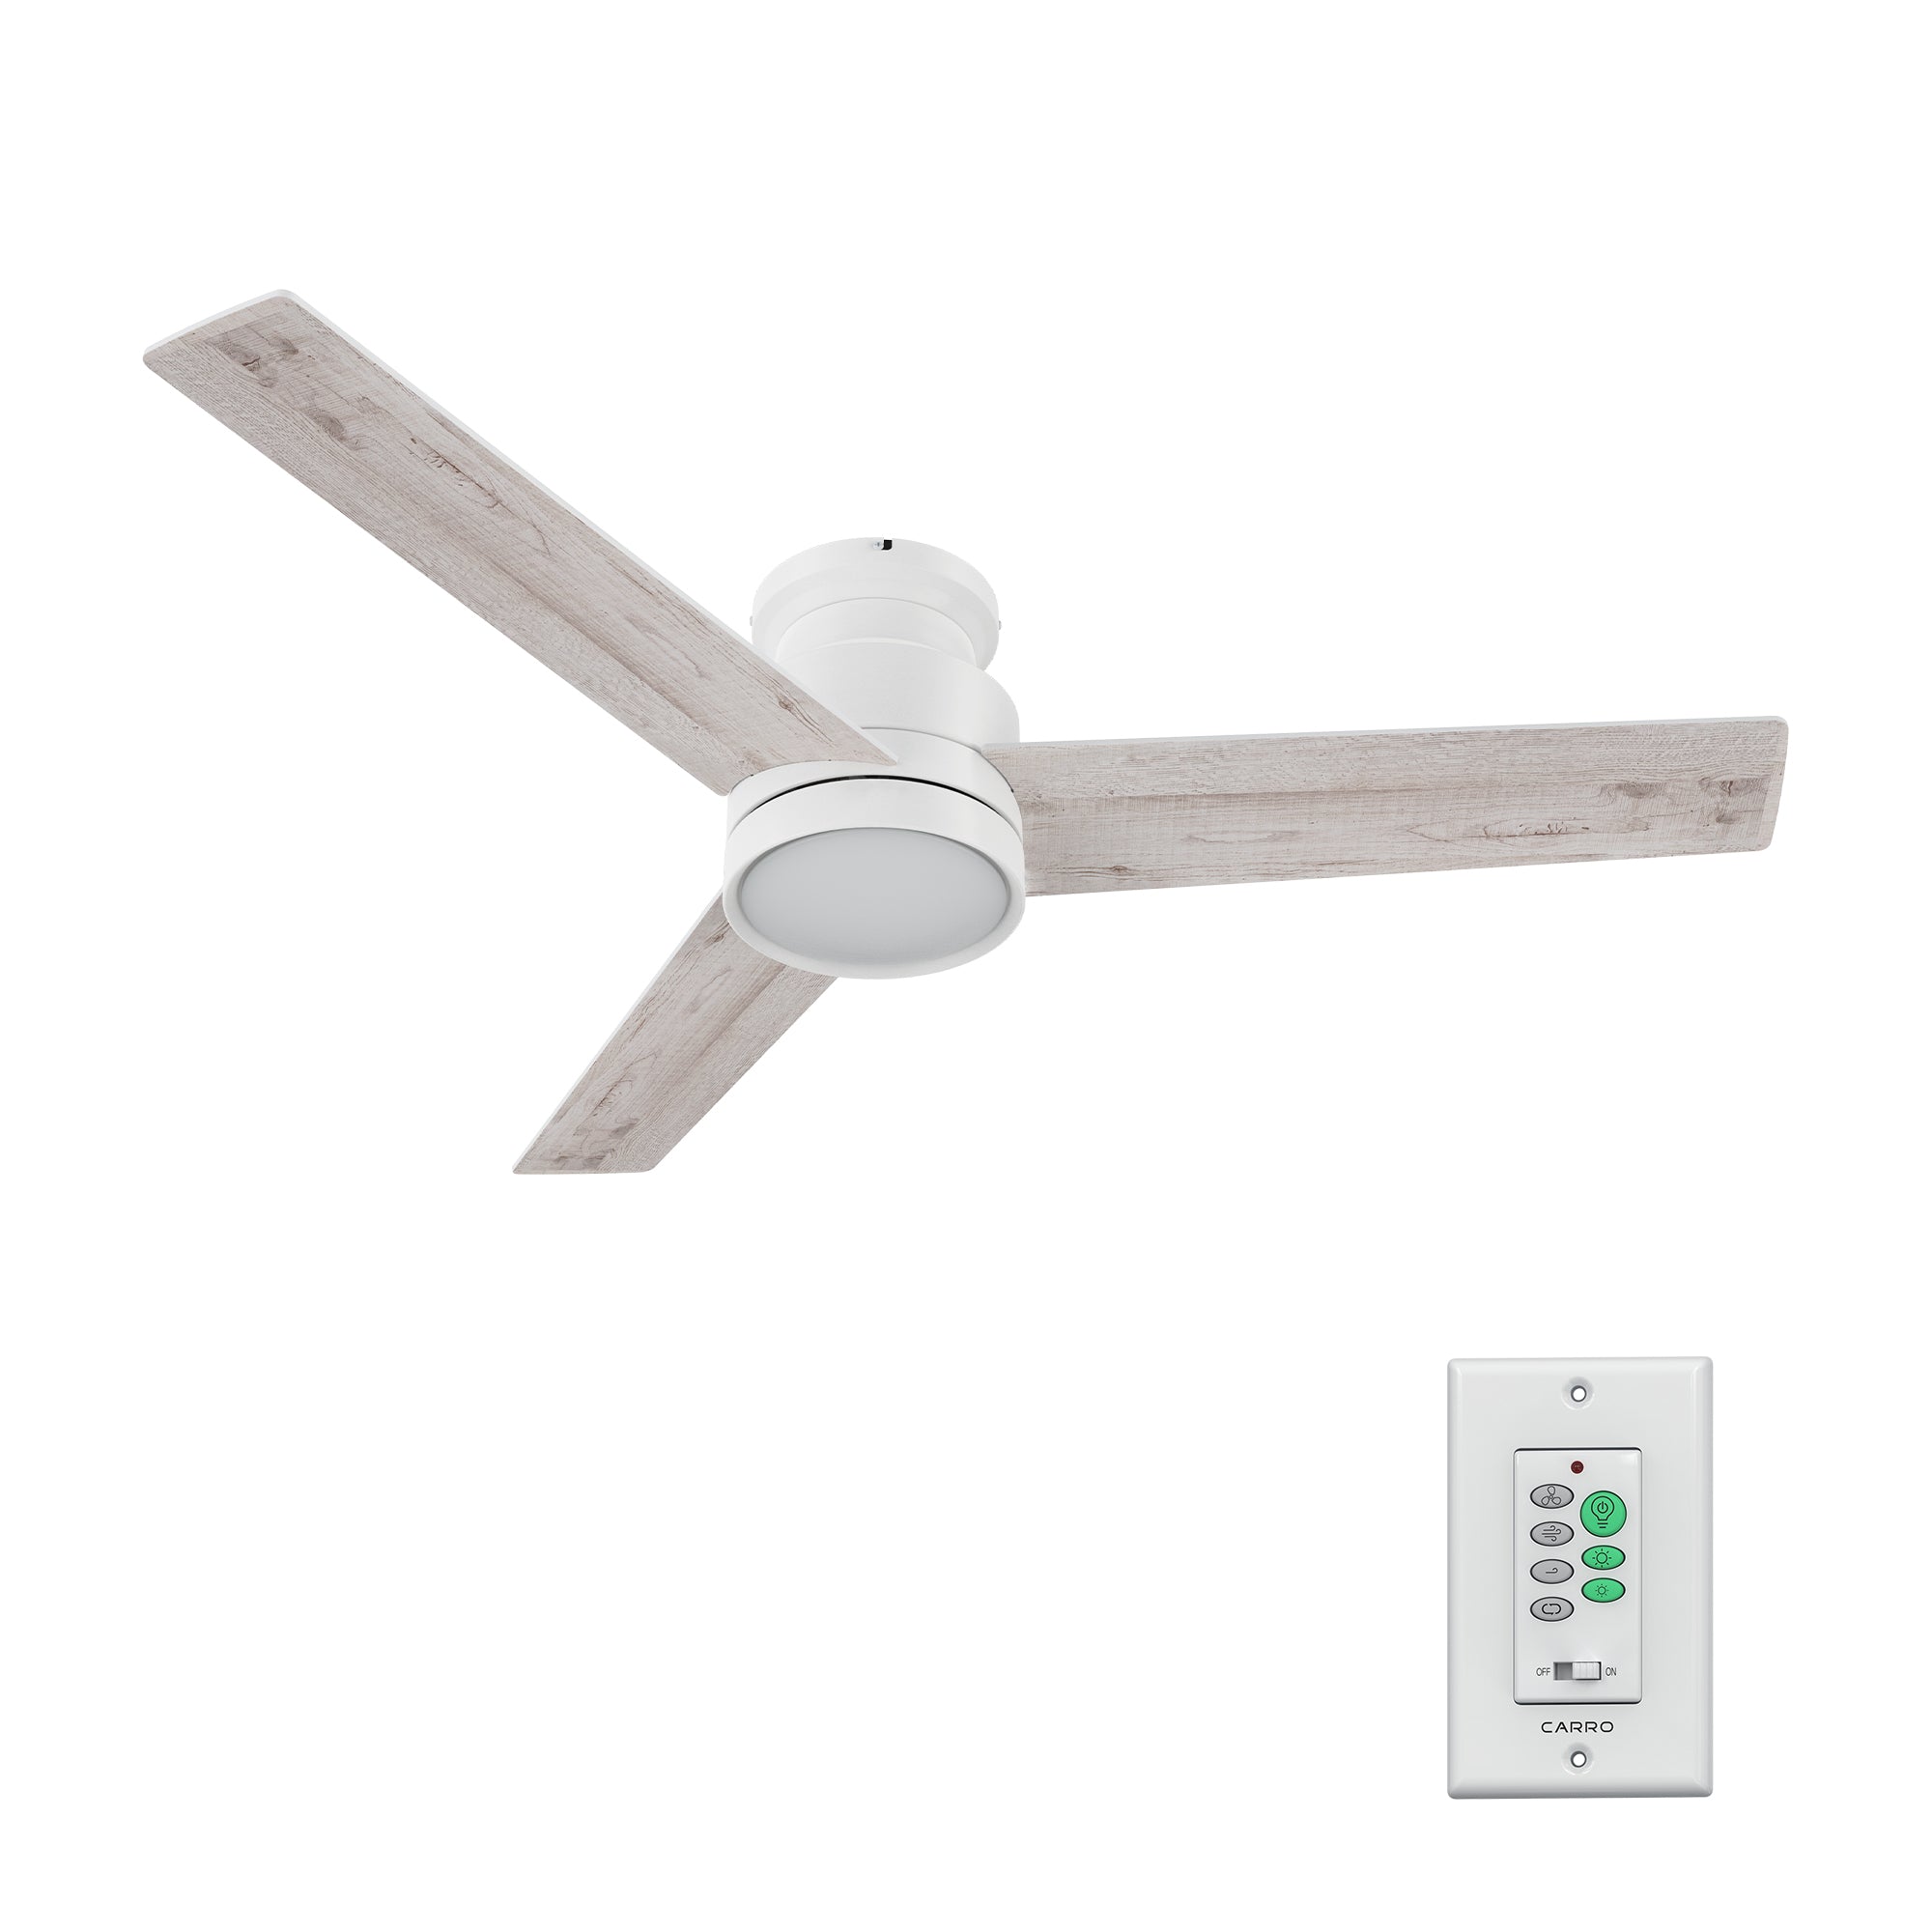 Low profile ceiling fan in white with wall switch control allows you to operate remotely to turn the fan on and off, change the light, adjust the 10-speed choice, reversible direction etc.